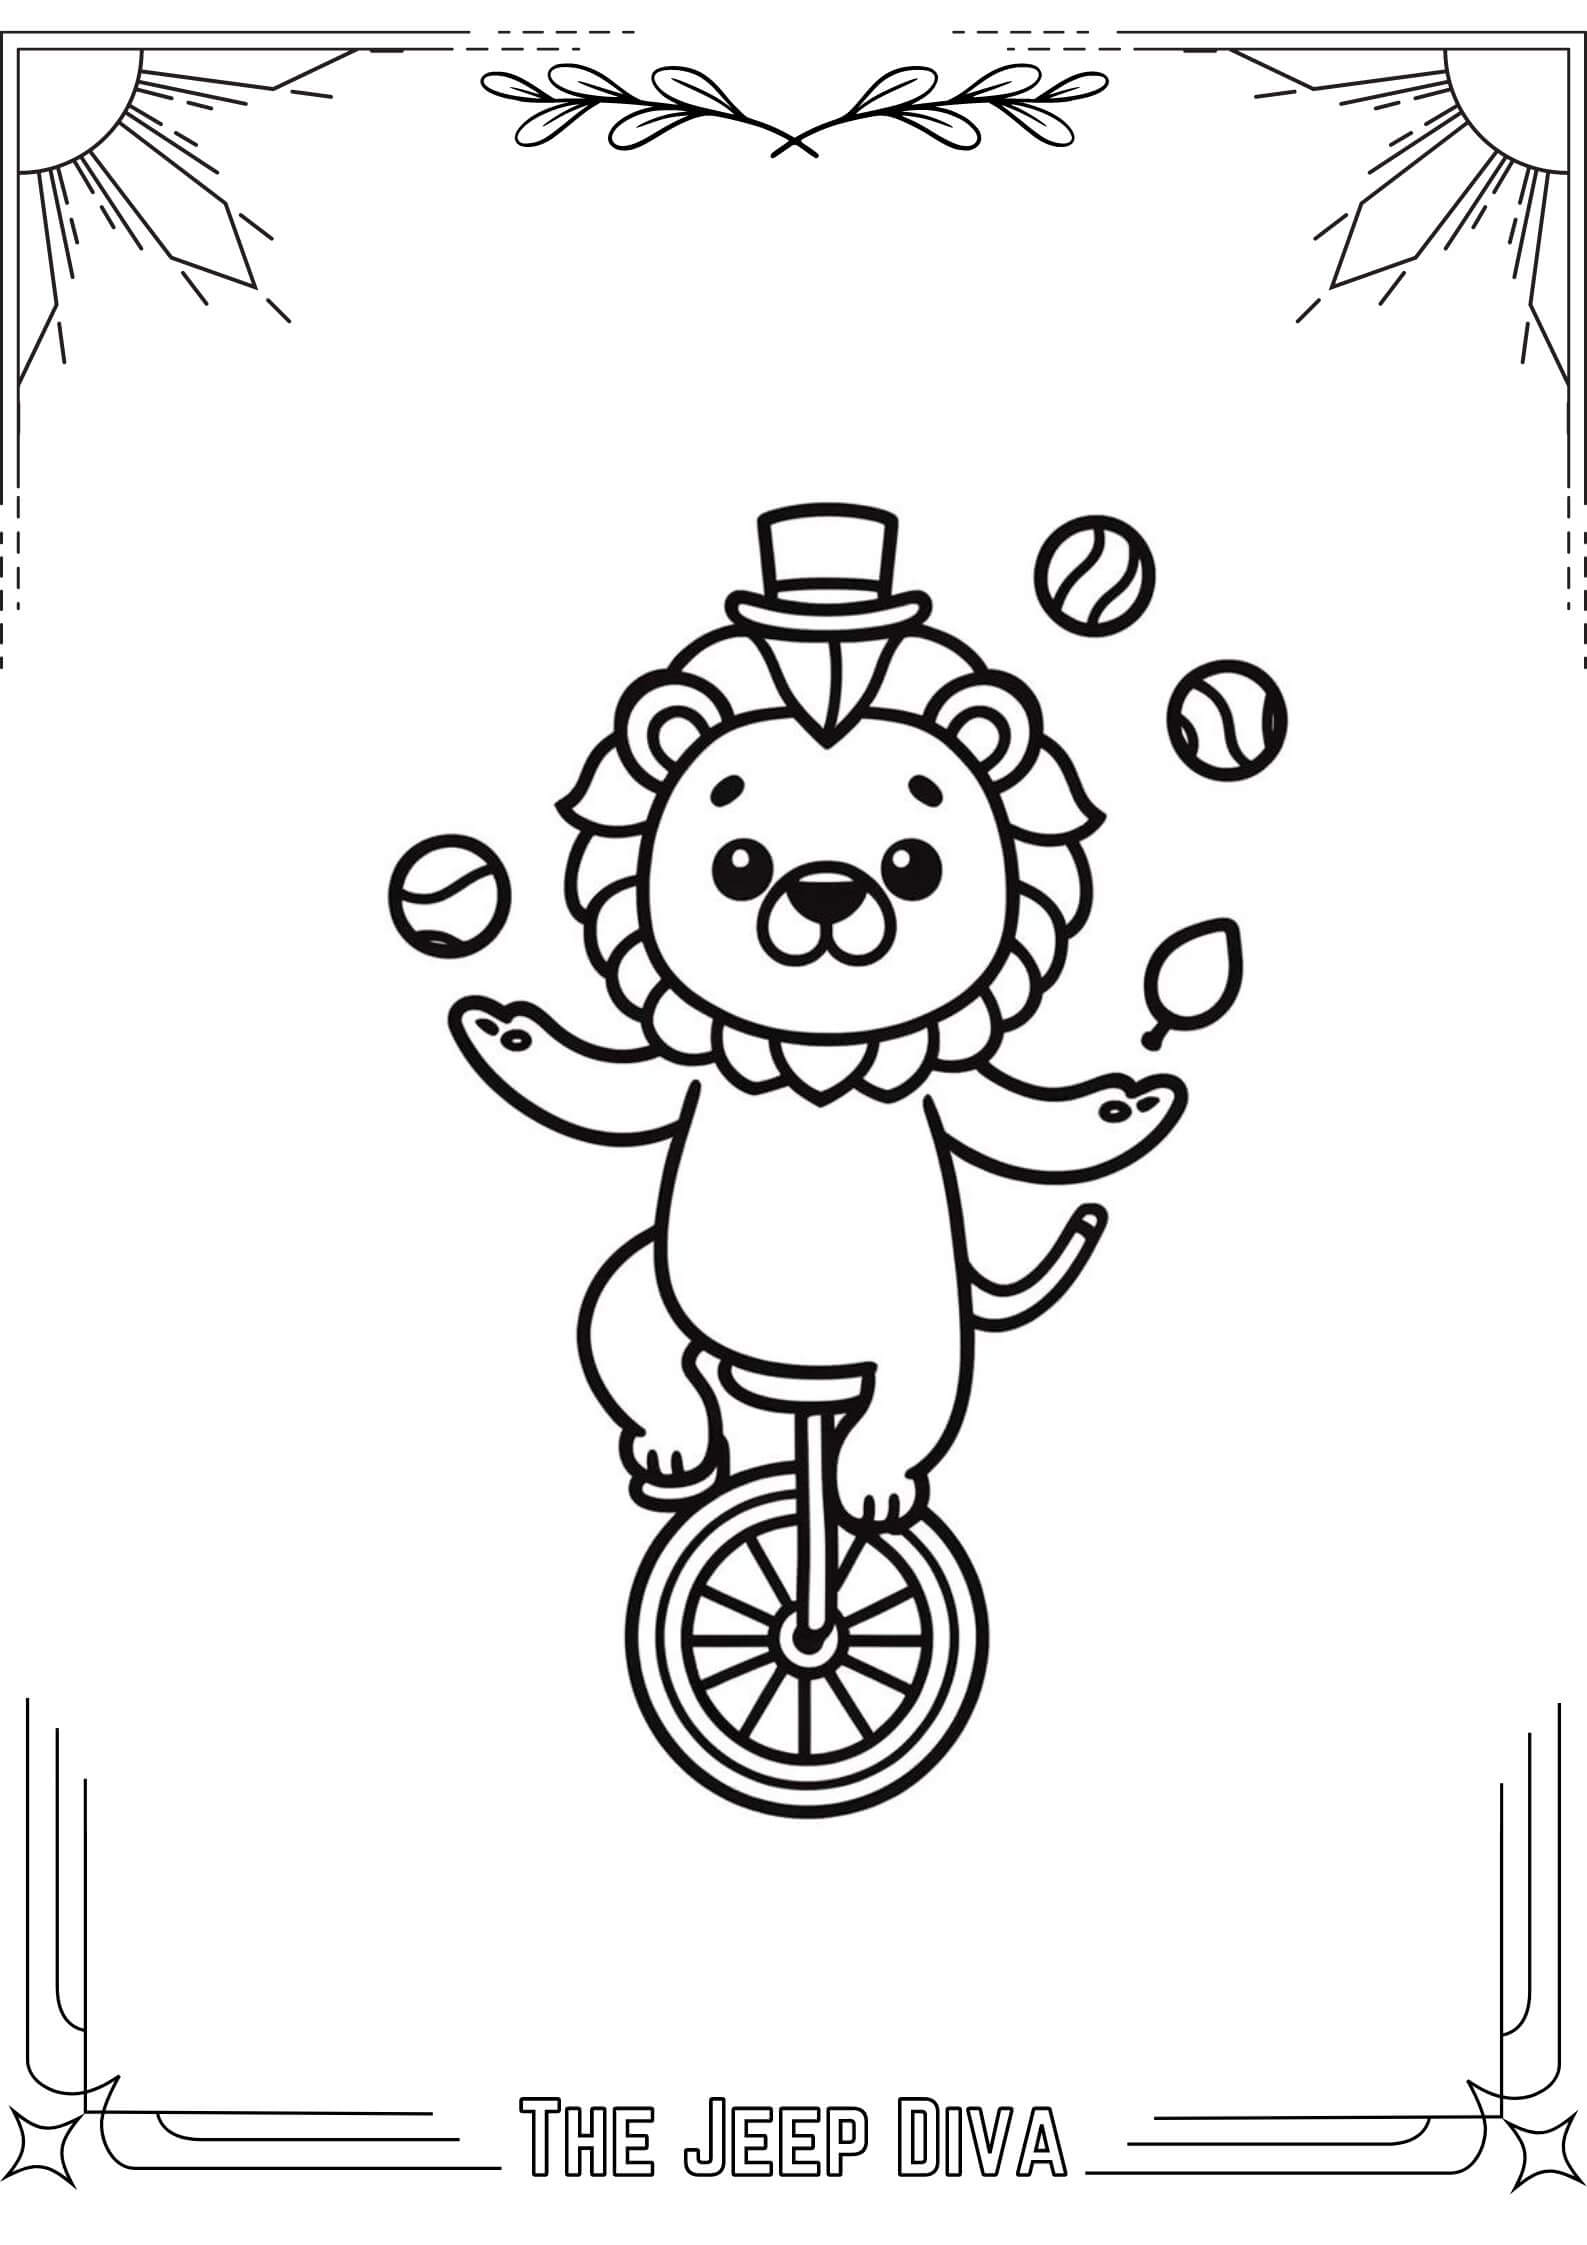 The Jeep Diva Coloring Page Lion Medium Difficulty 18